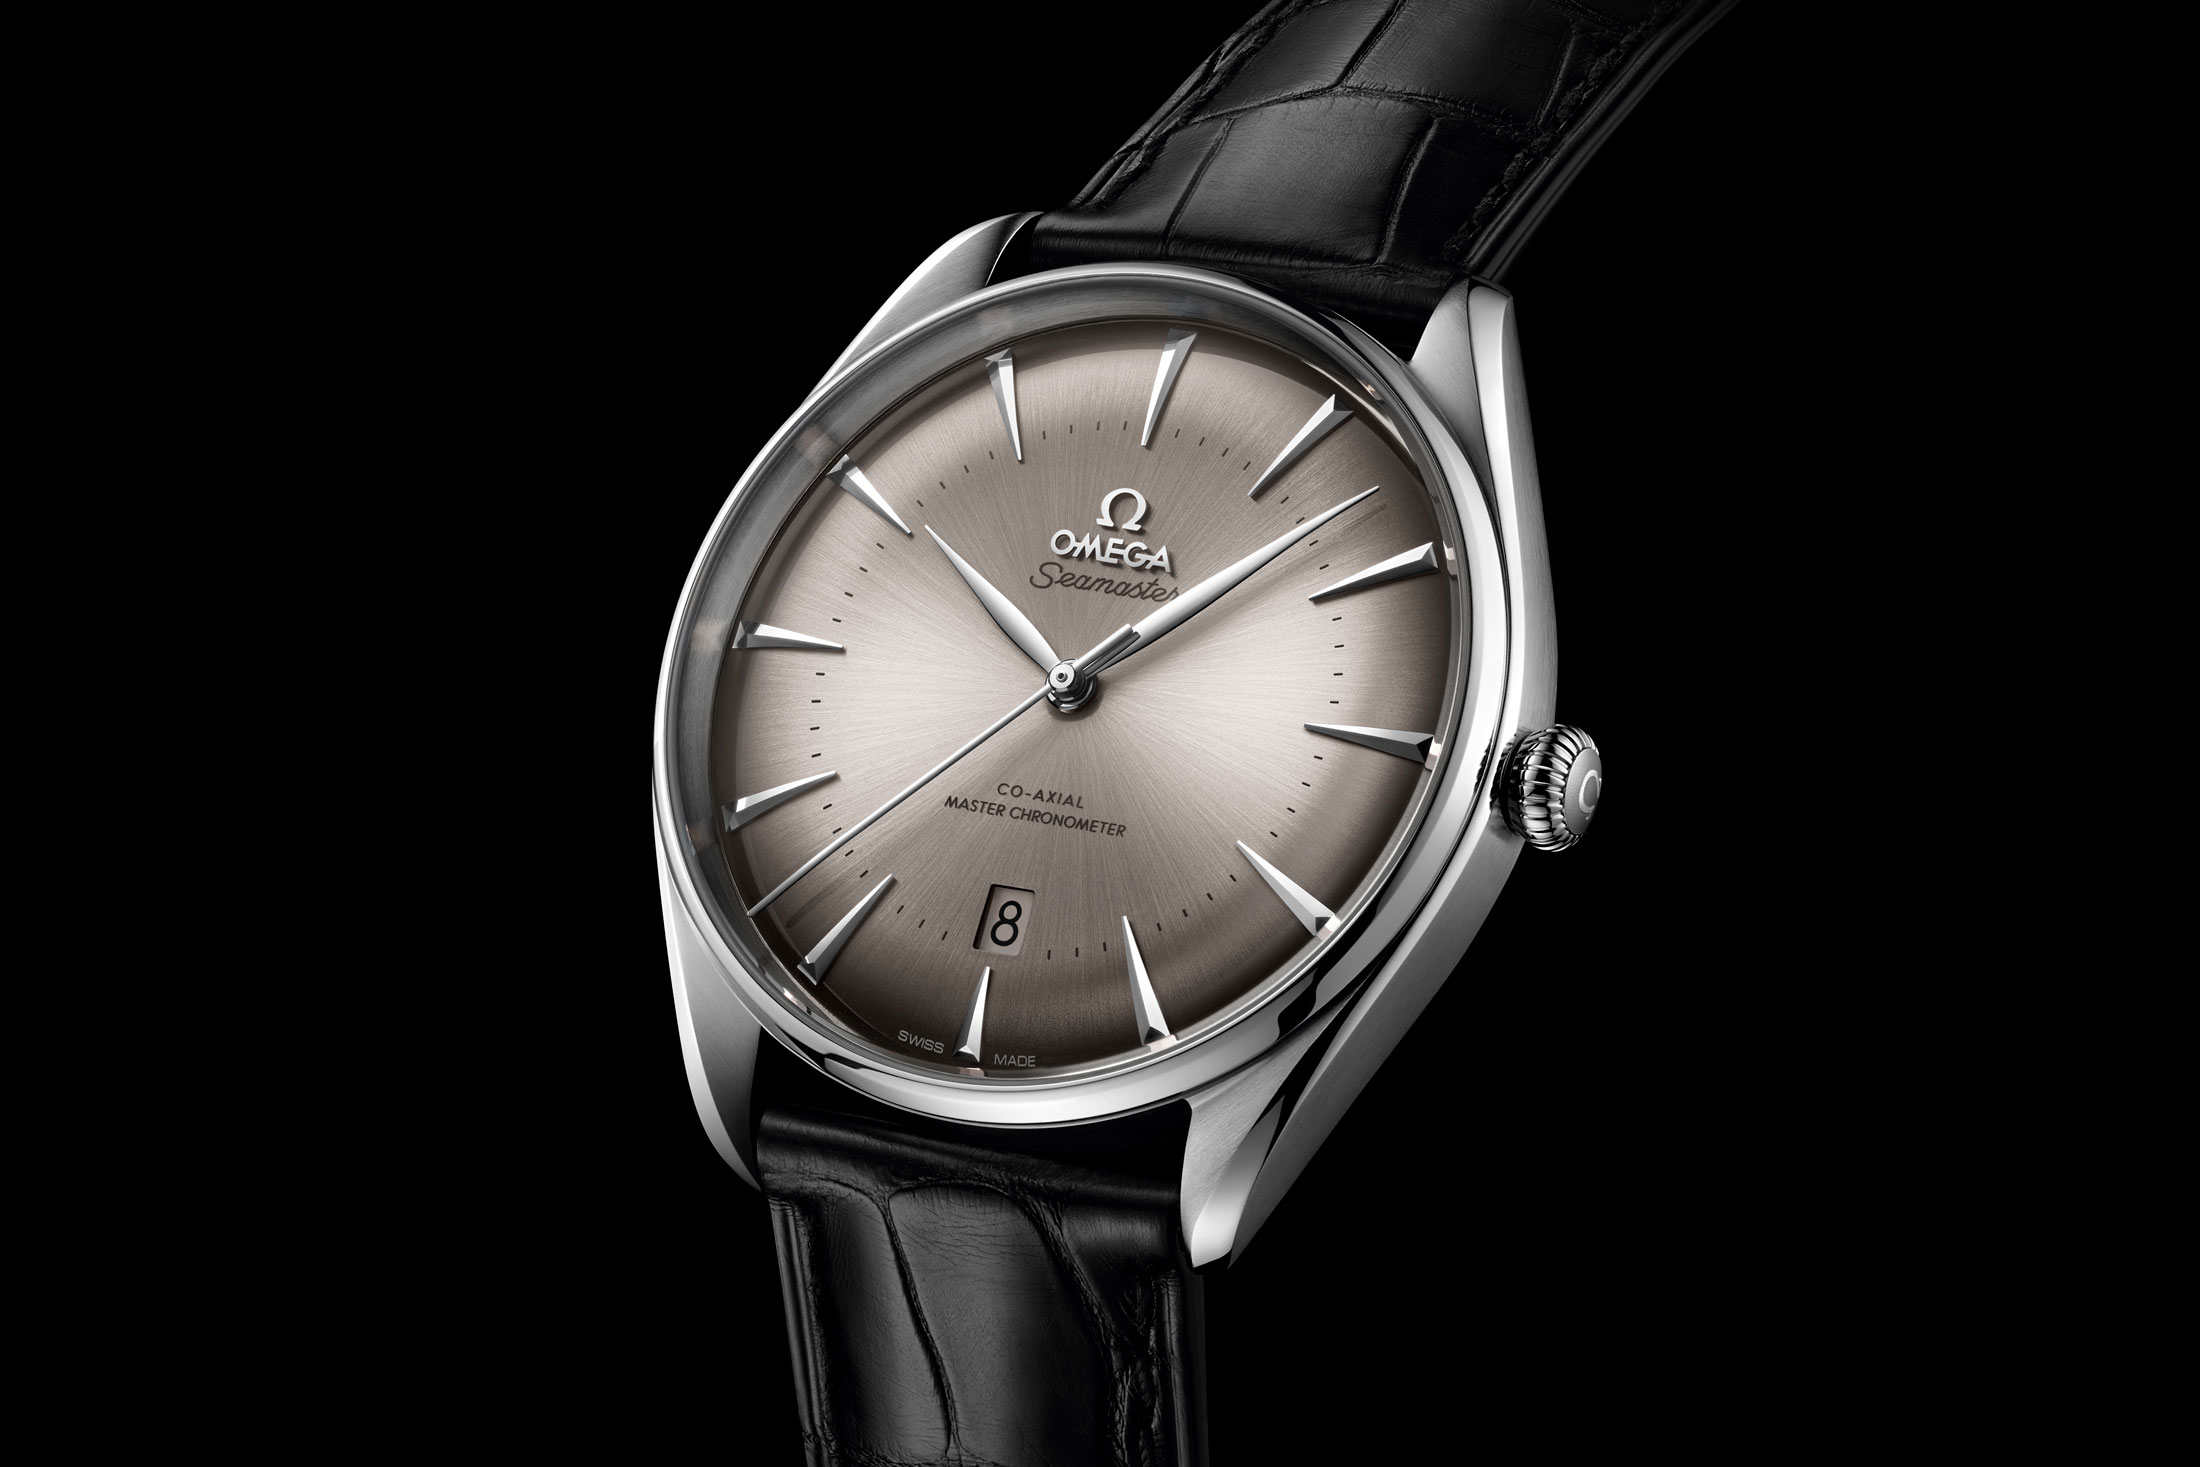 The Omega Seamaster Exclusive Boutique 